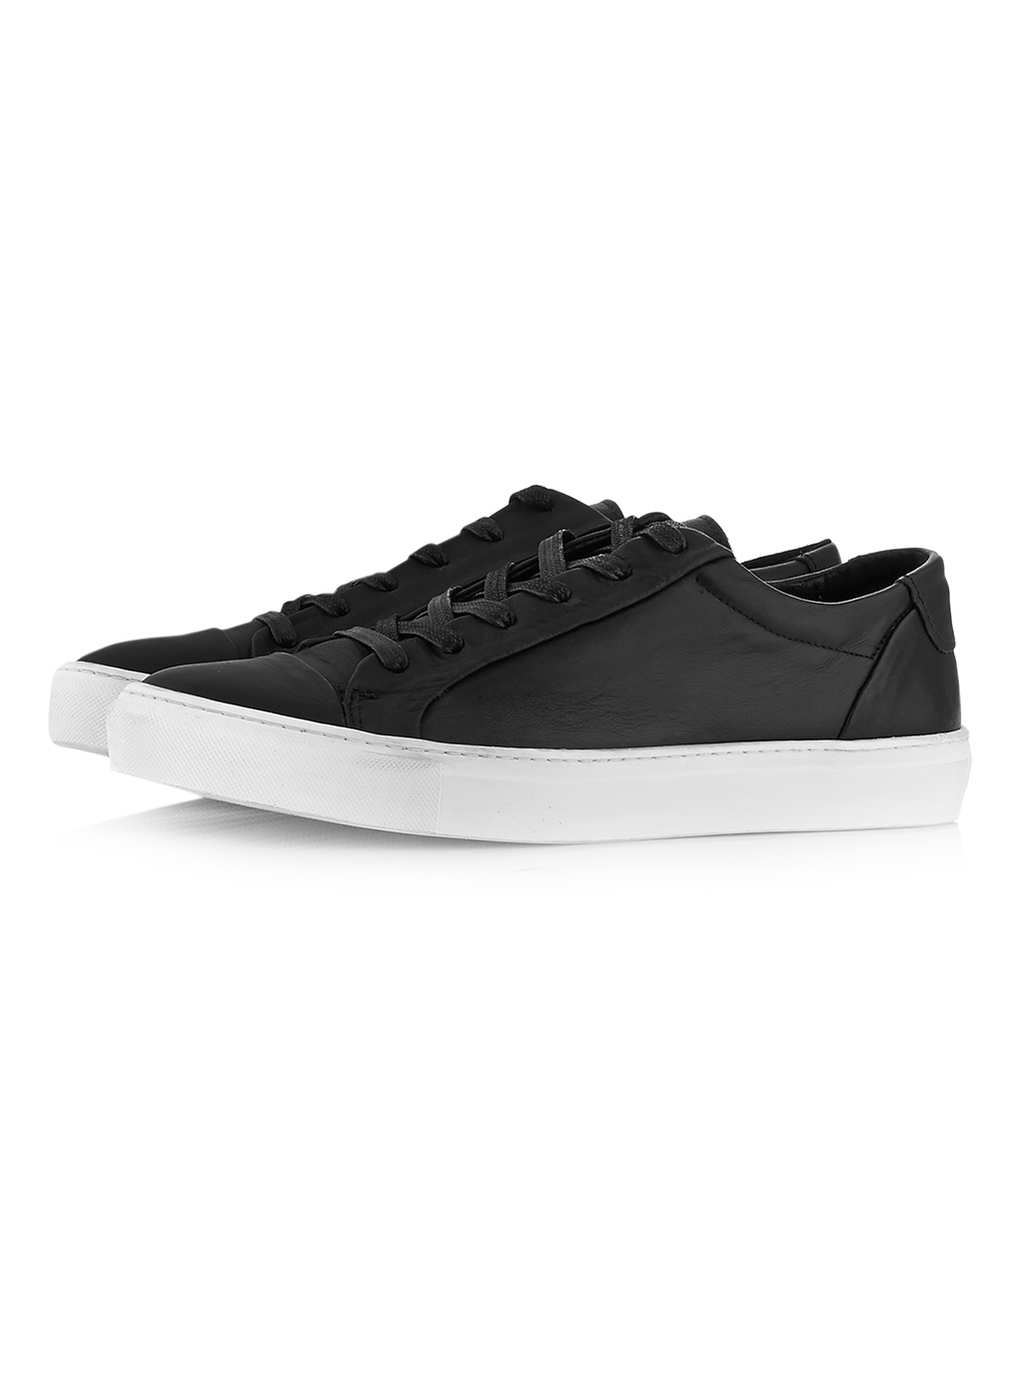 Tux Black Leather Tennis Shoes - Plimsolls & Trainers - Shoes and Accessories - TOPMAN